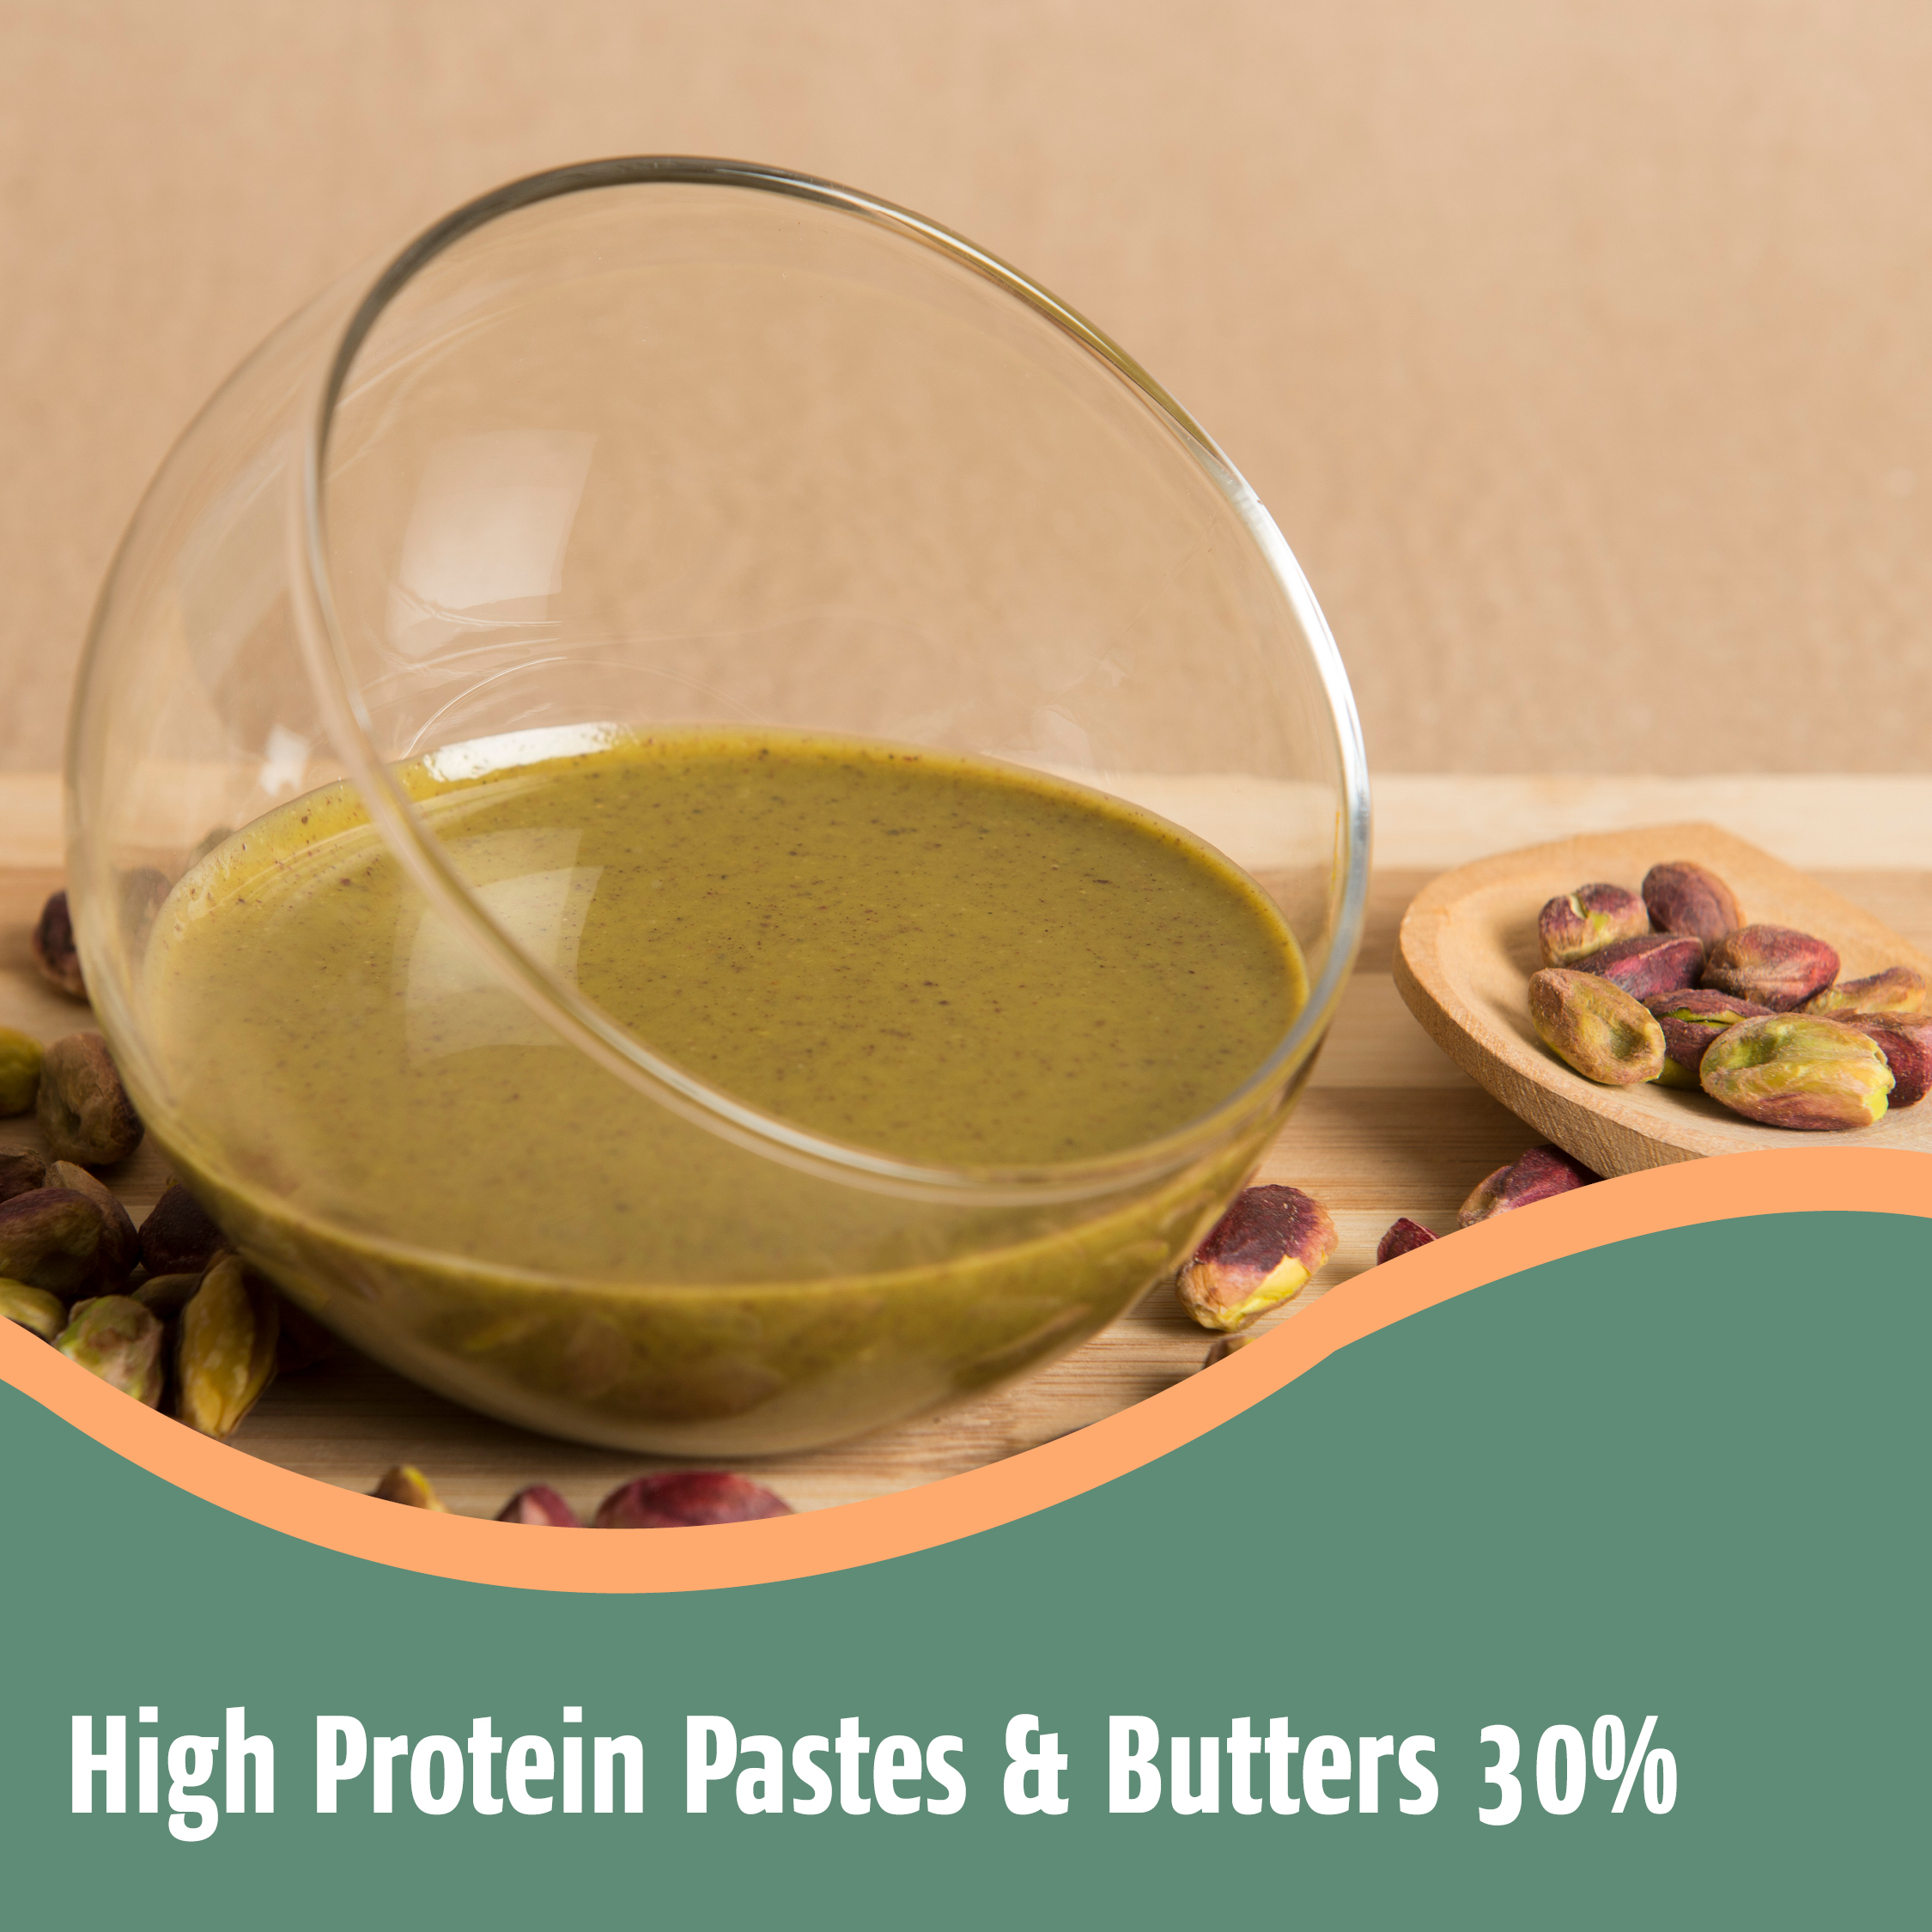 High Protein Nut Pastes & Butters 30%